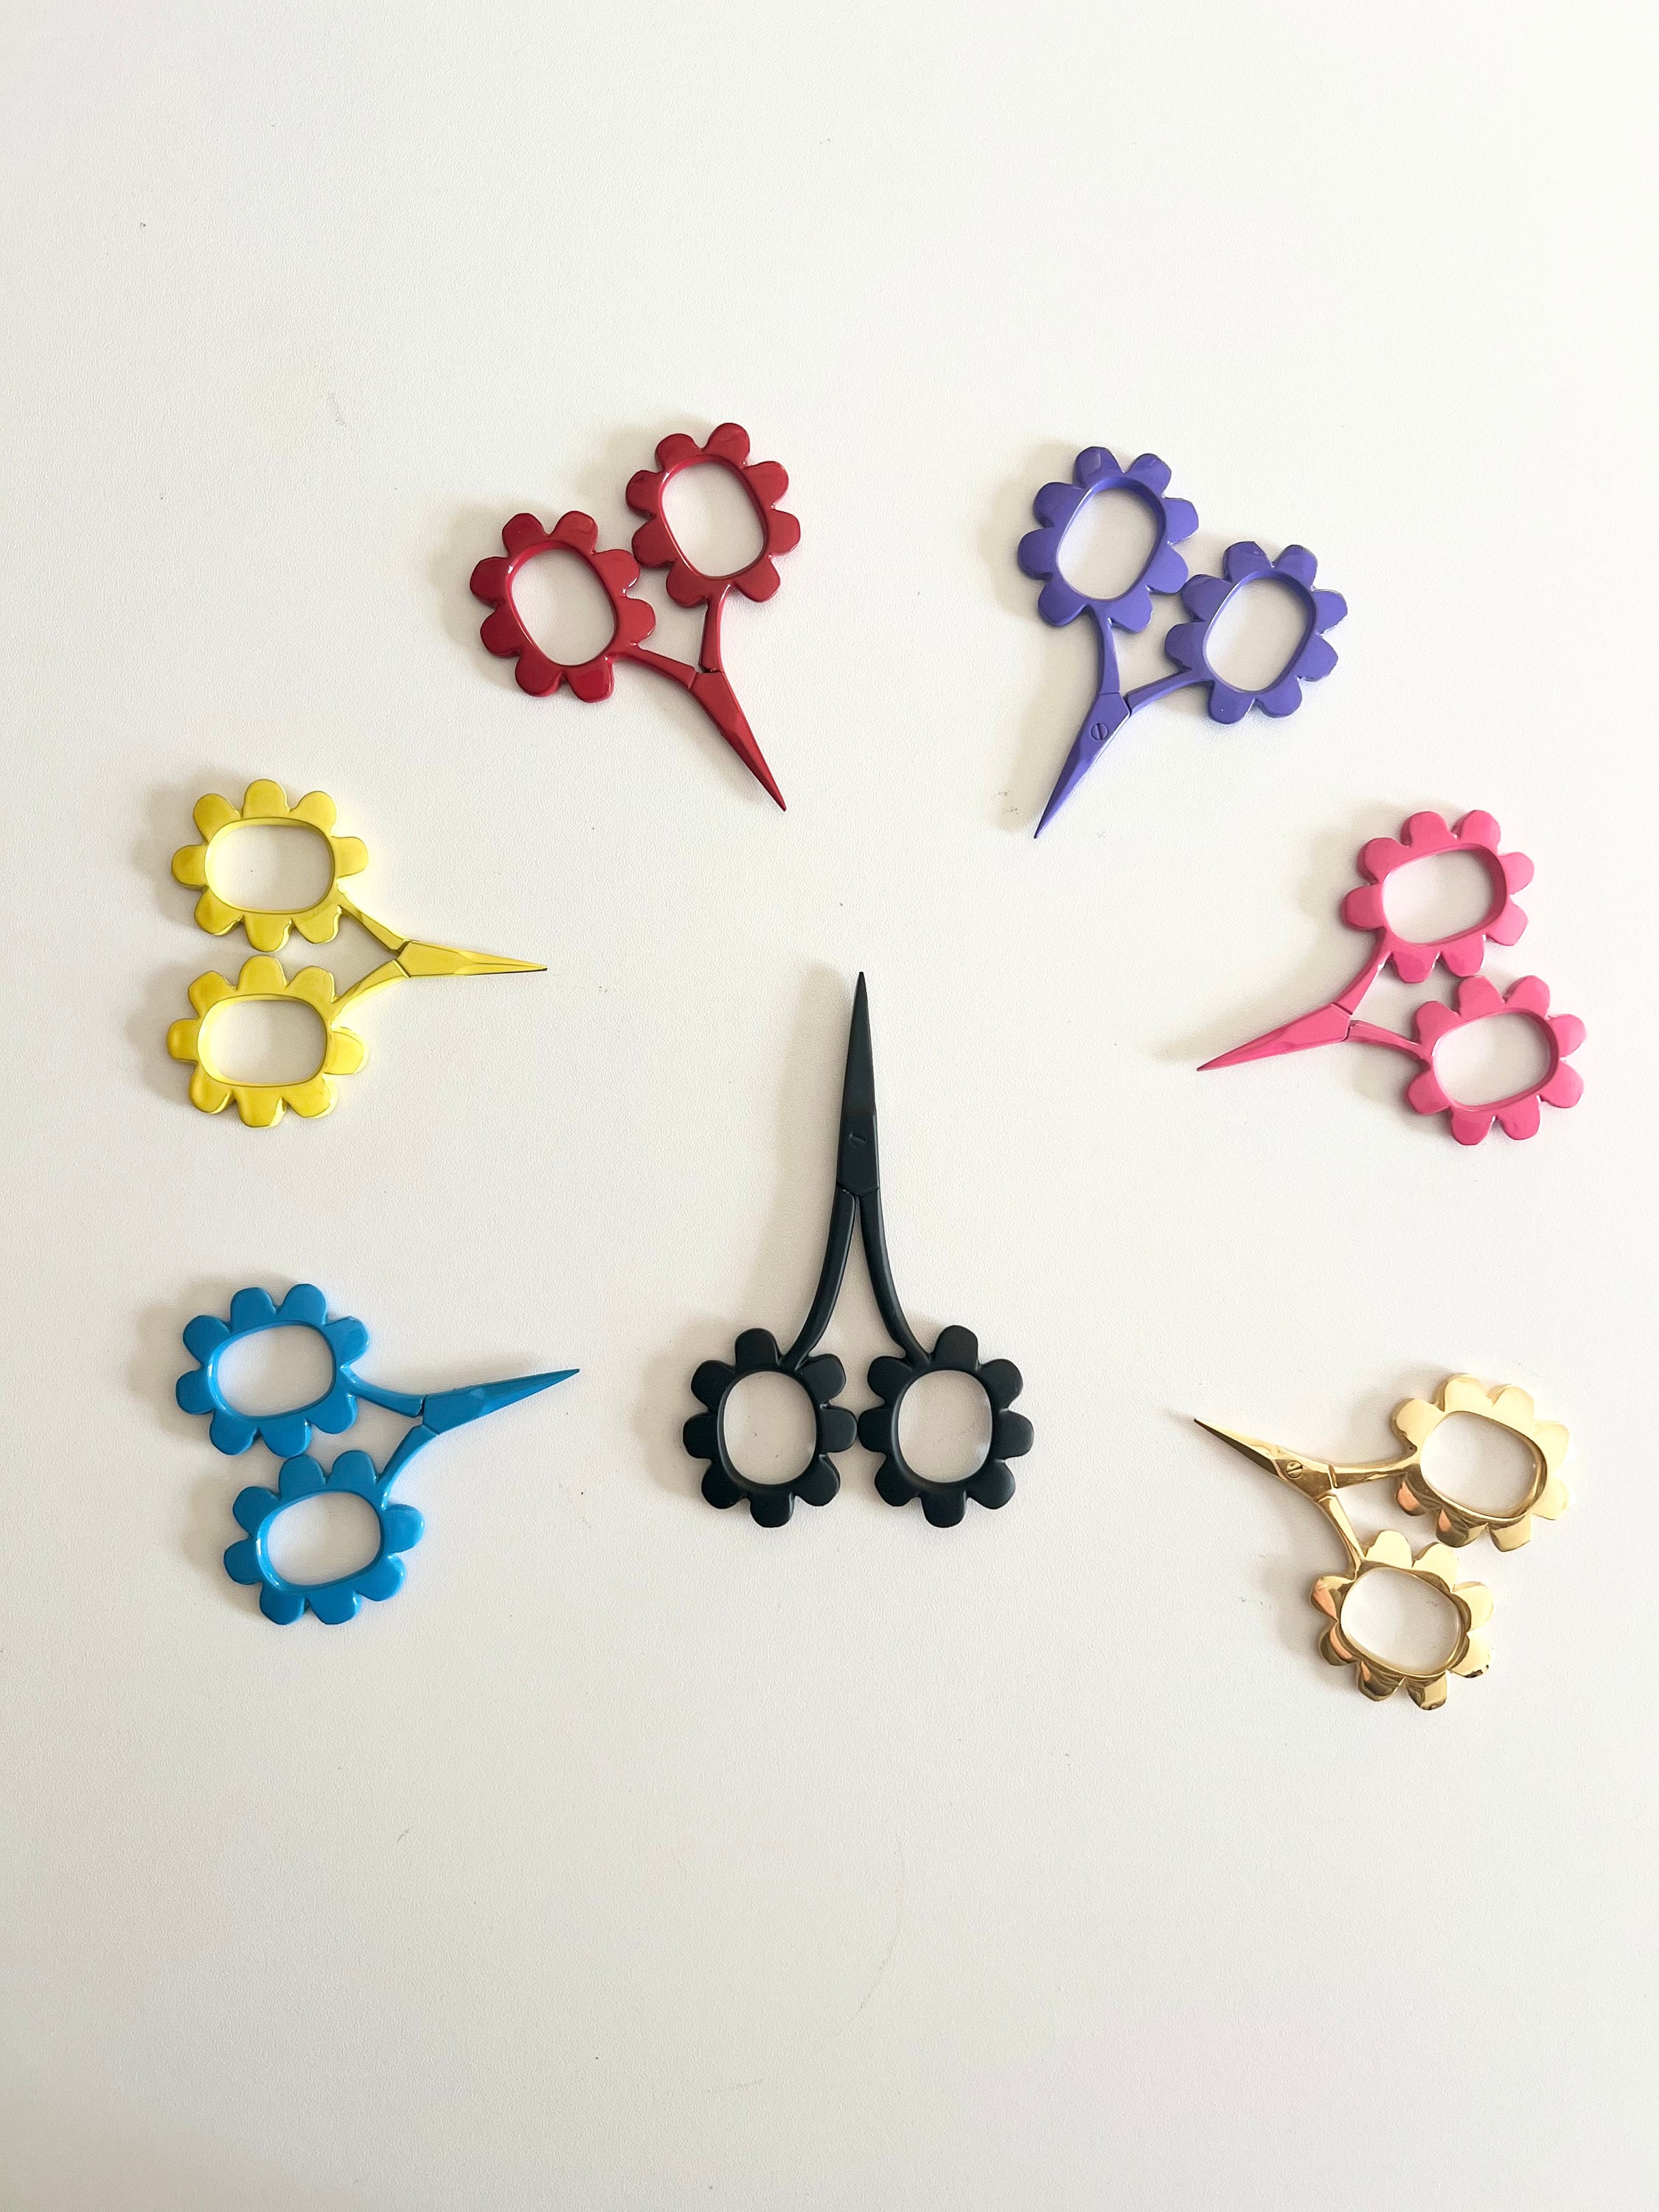 Yellow Color Craft Scissors, Embroidery Scissors, Easy Scissors,handmade  Scissors Scissors, Floss Scissors,thread Scissors-little Scissors 